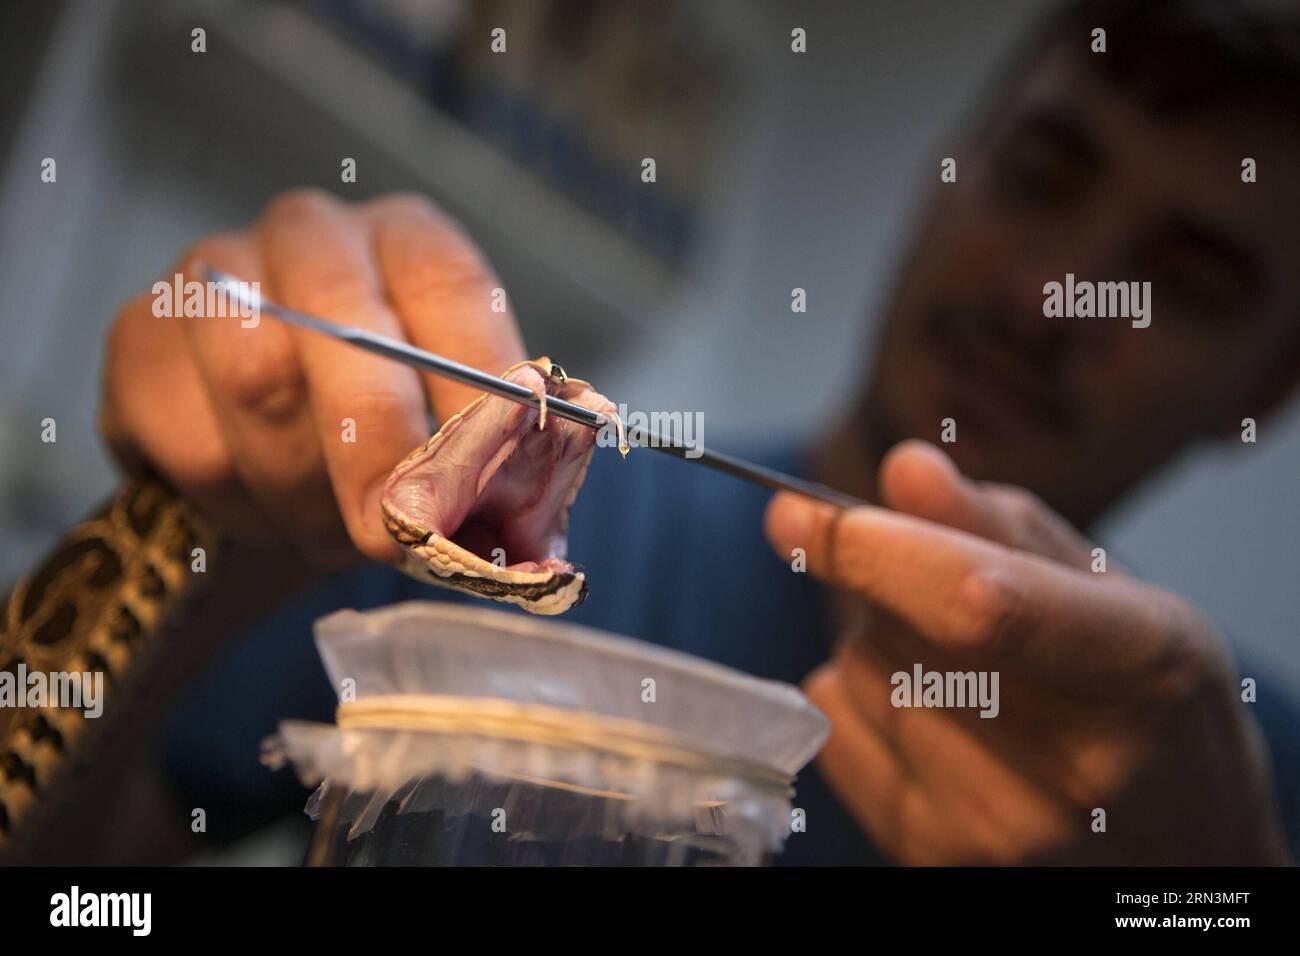 TECHNIK UND WISSENSCHAFT Argentinien - Gegengift-Produktion im Malbran Institut in Buenos Aires (150422) -- BUENOS AIRES, April 21, 2015 -- A biologist in the Poisonous Animals Area of the Antidotes Production Department of Malbran Institute, shows a drop of venom that comes from the fangs of a Yarara snake in Buenos Aires, Argentina, on April 21, 2015. The Department is in charge of producing antidotes with the poison extracted from snakes, spiders and scorpions. Martin Zabala)(zhf) ARGENTINA-BUENOS AIRES-SCIENCE-ANTIDOTES e MARTINxZABALA PUBLICATIONxNOTxINxCHN   Technology and Science Argent Stock Photo